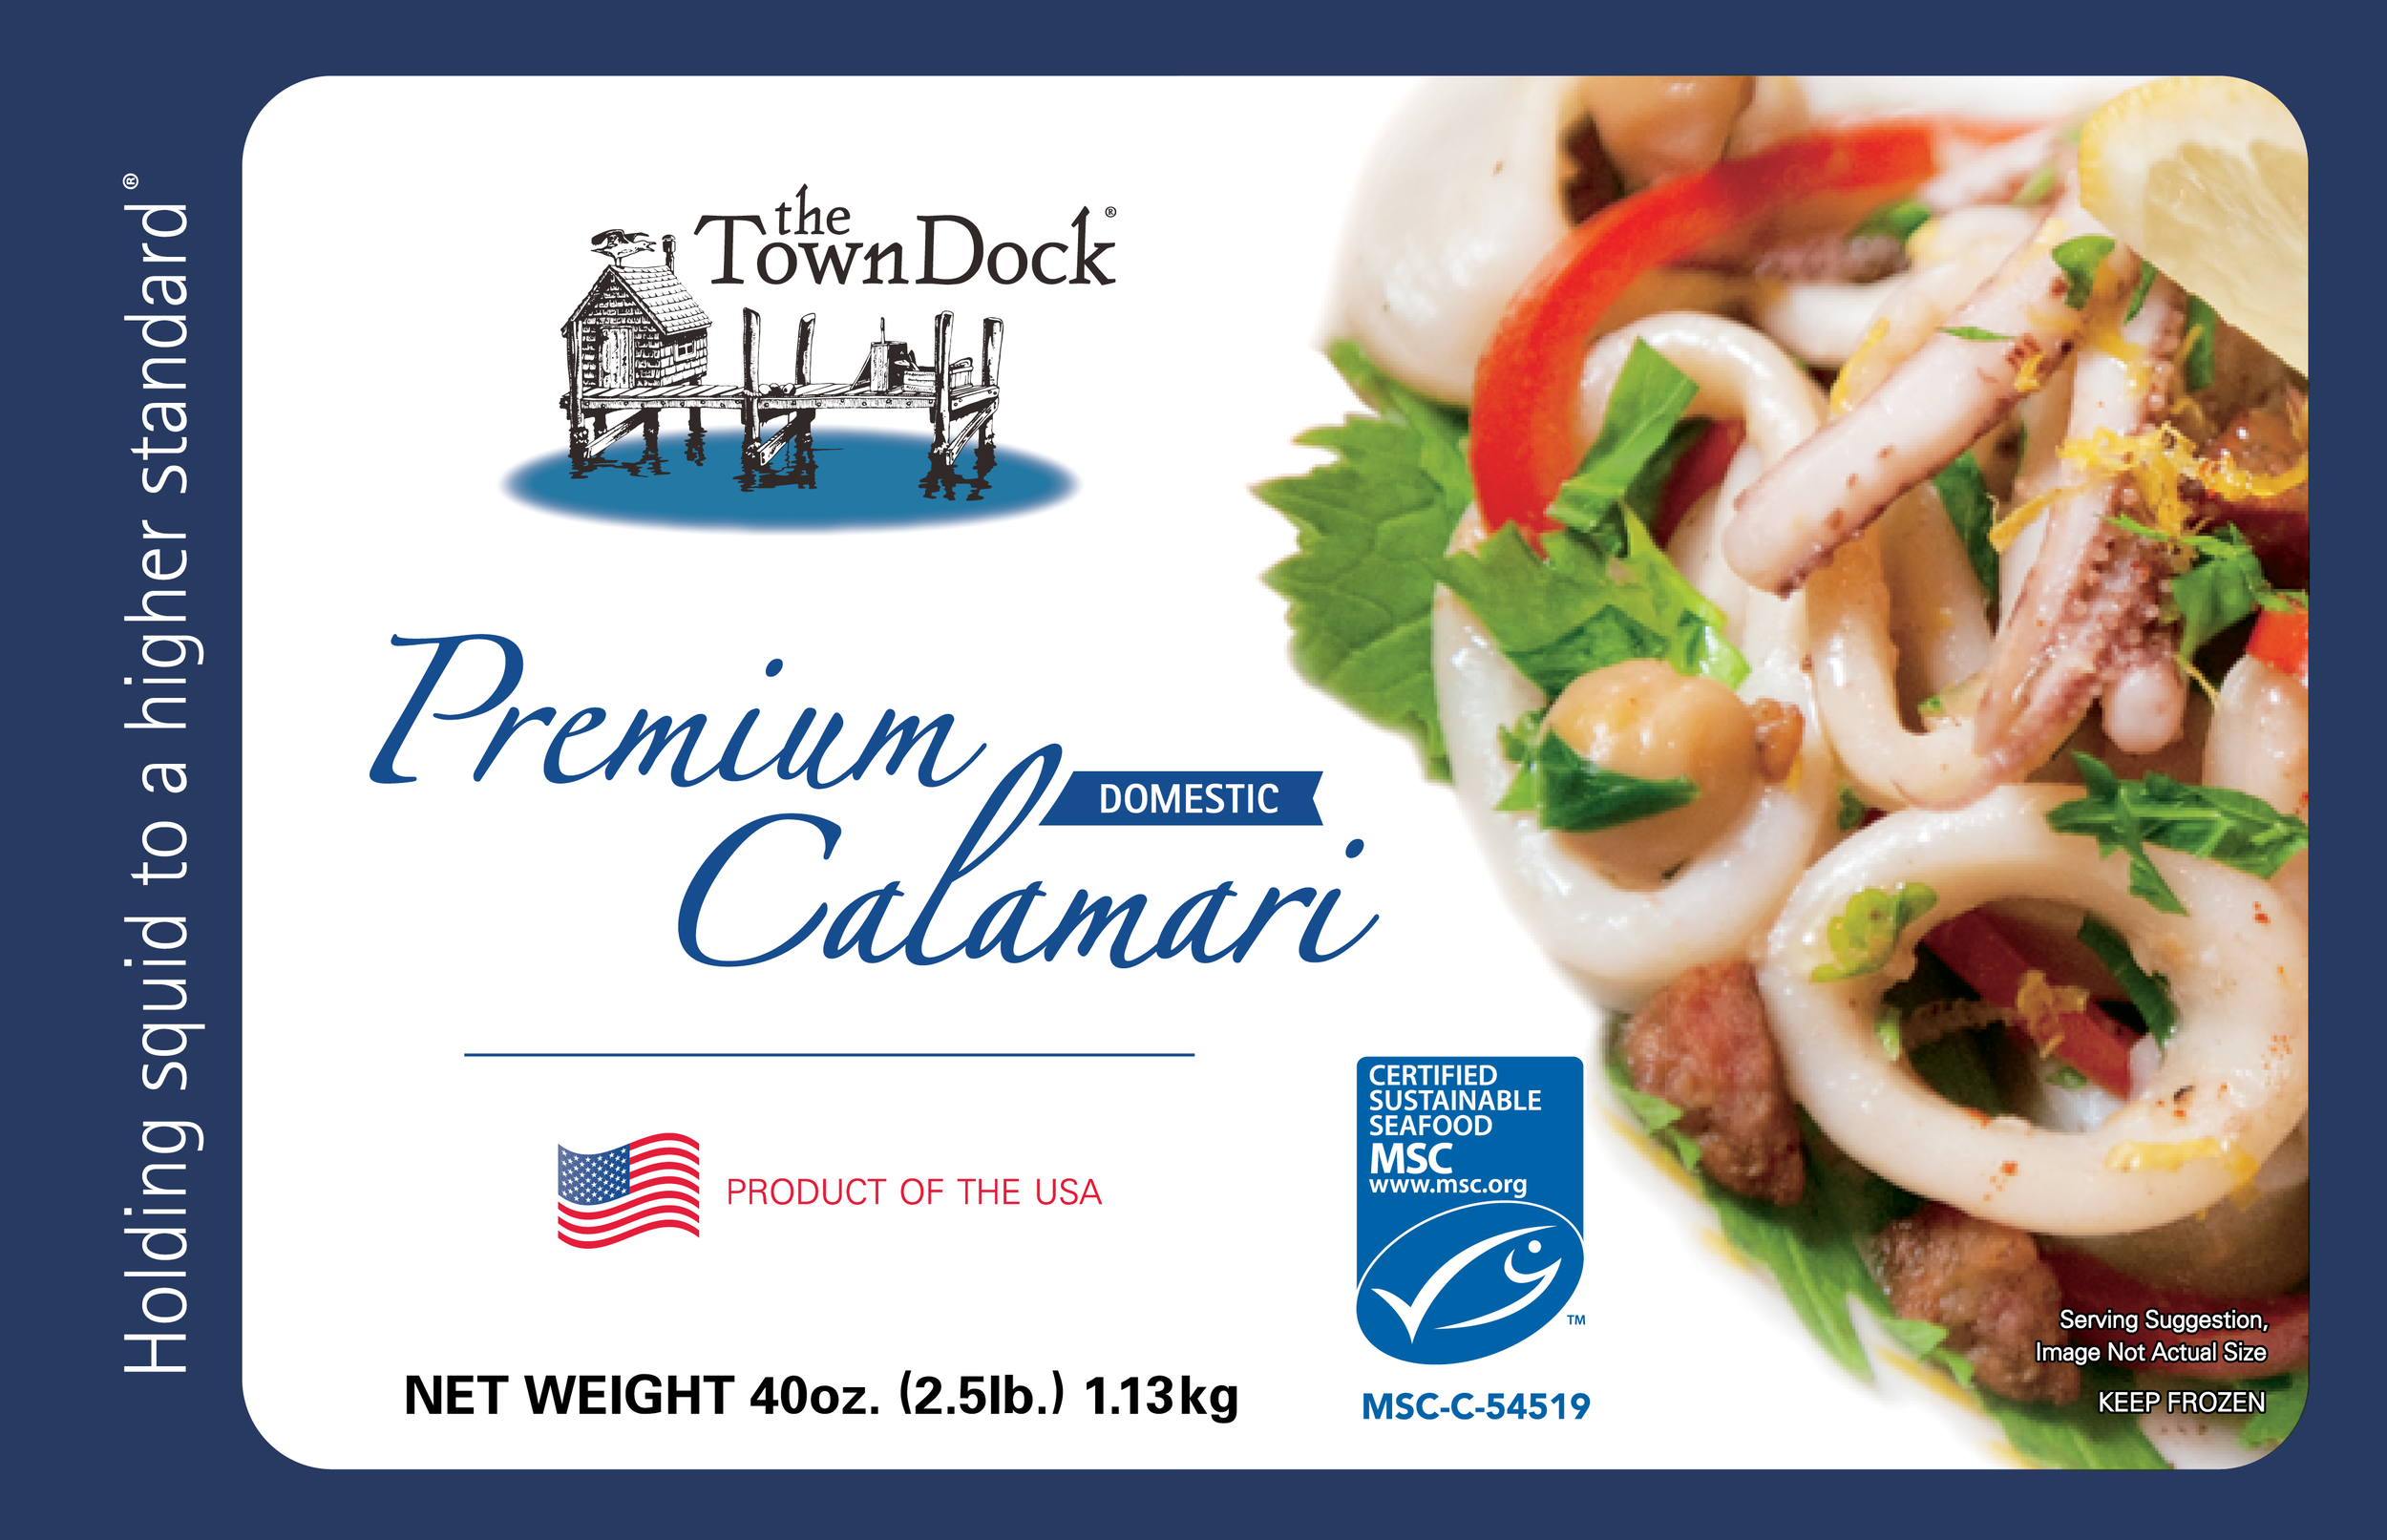 Picture of the 2.5 lb inner foodservice bag for wholesale Premium Domestic Calamari, including the MSC blue fish logo 